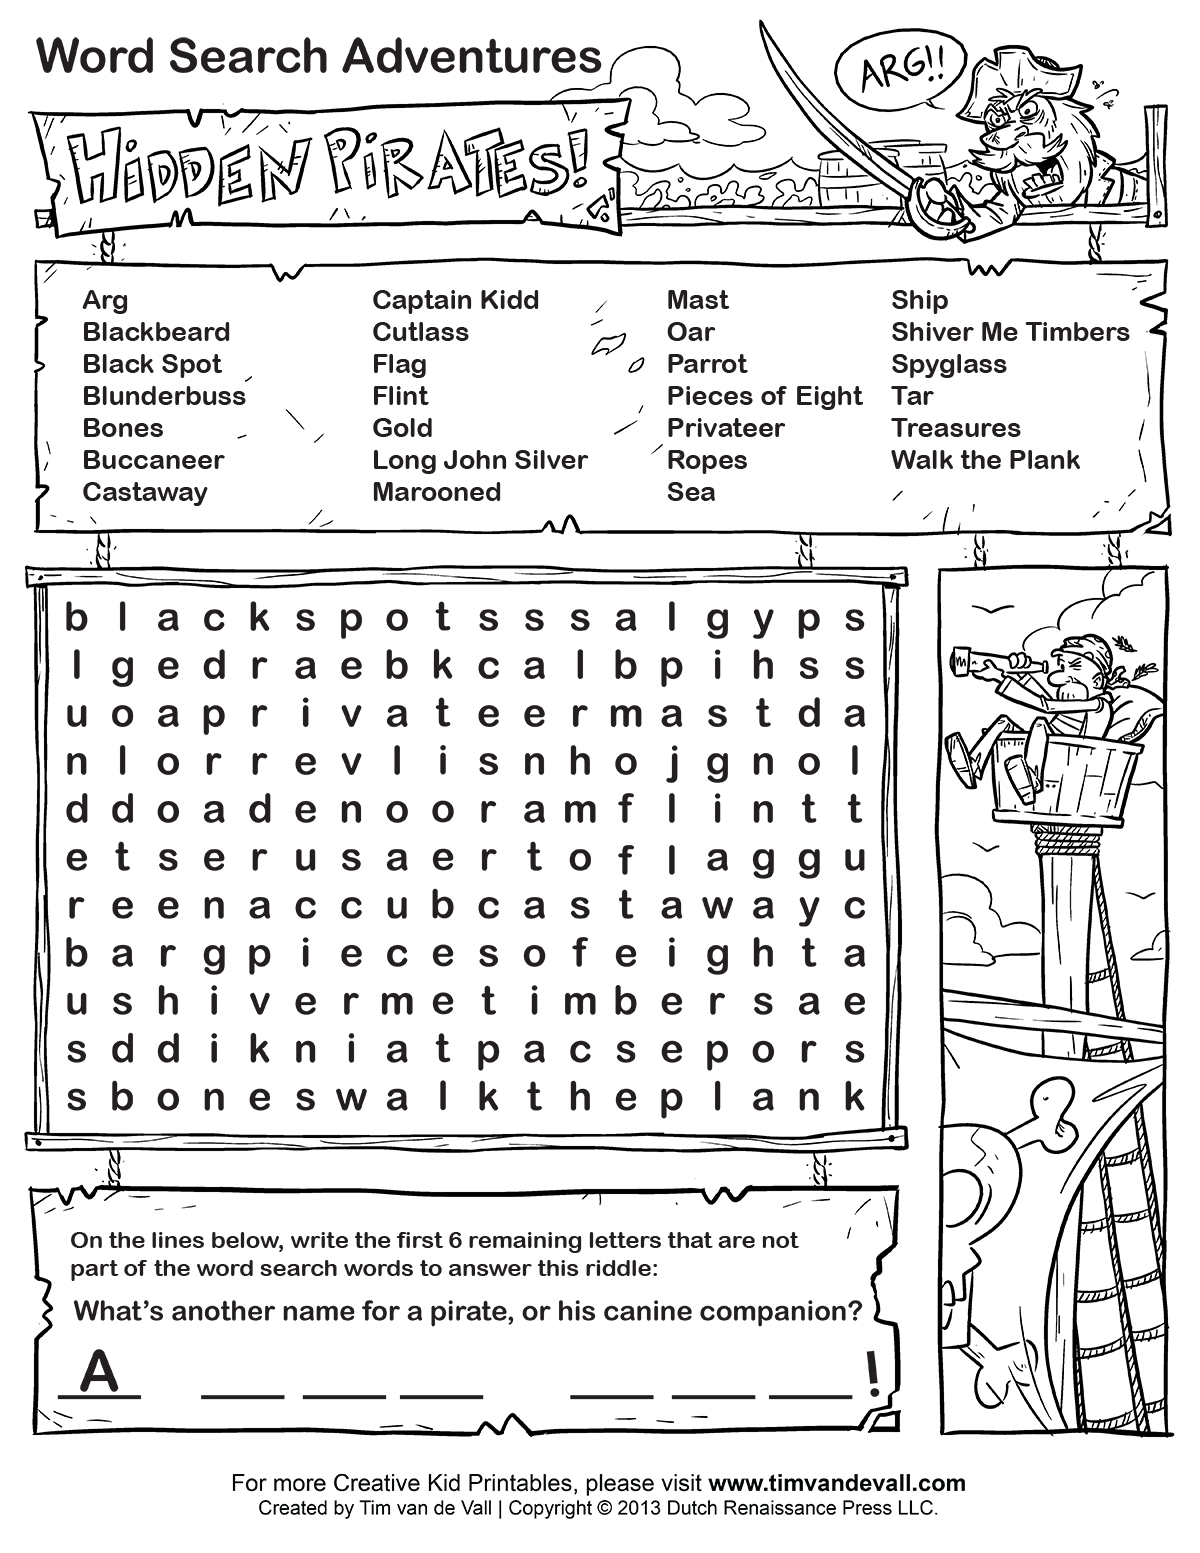 free-printable-word-searches-for-middle-school-students-free-printable